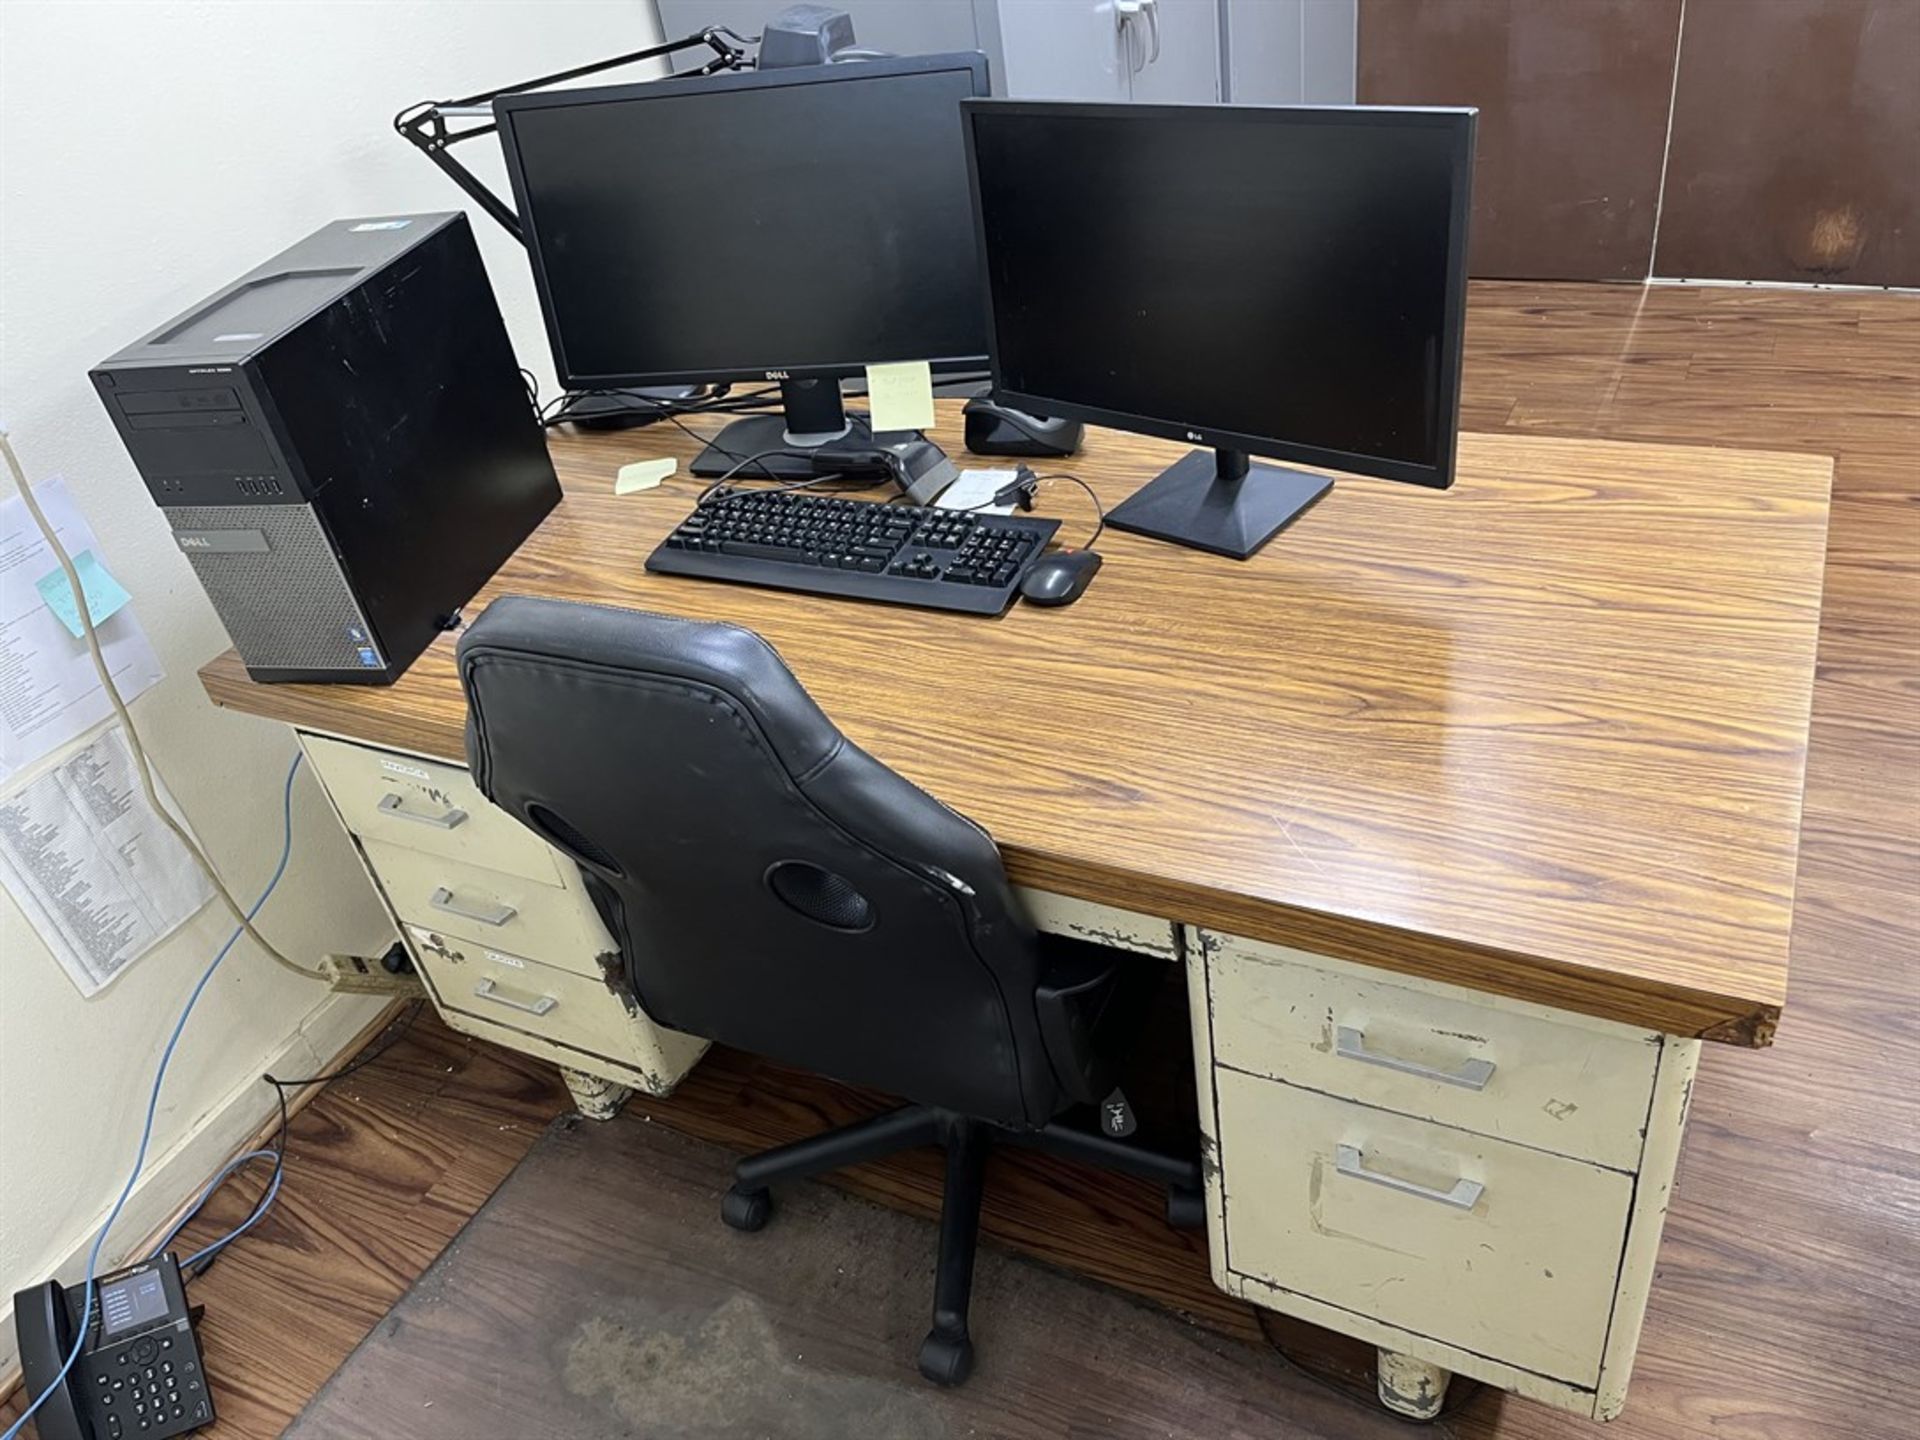 Lot consisting of Desk and , Monitors, (PC NOT INCLUDED)